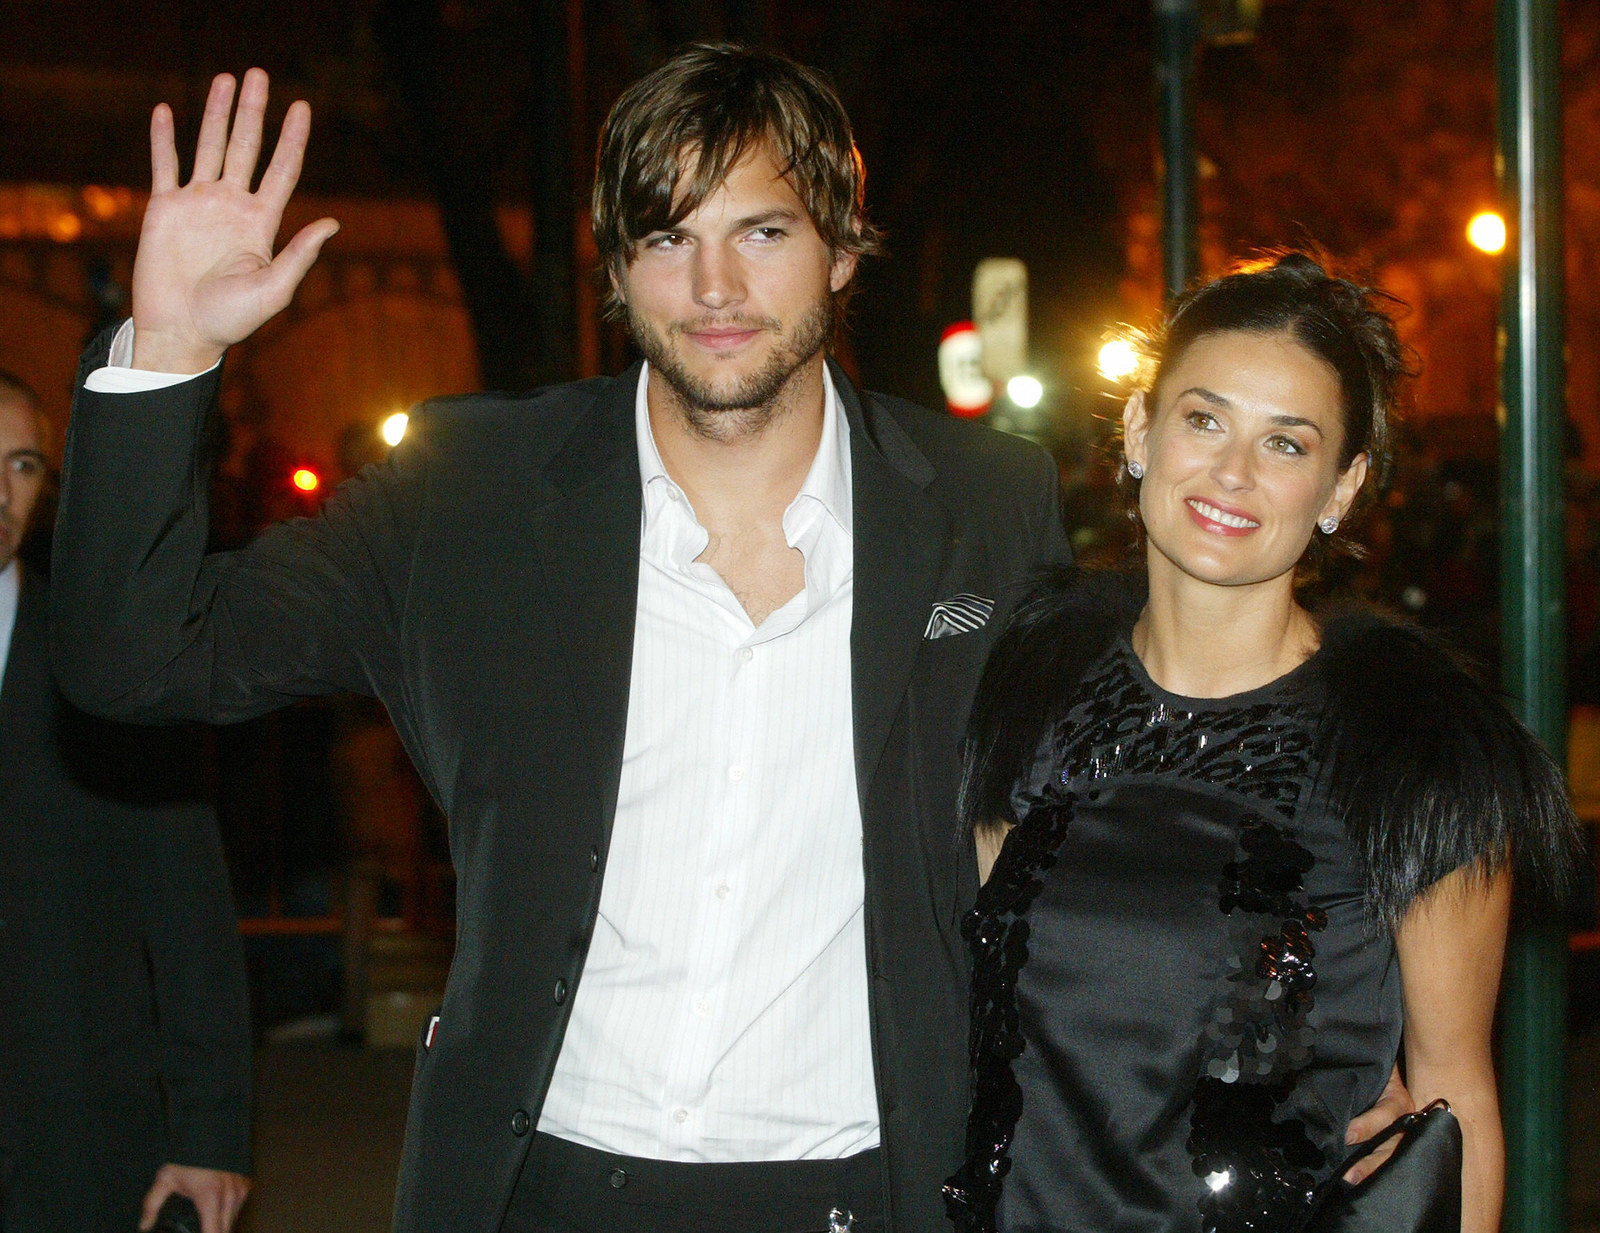 17 Random Celebrity Couples You Actually Haven't Thought About In 10 Years